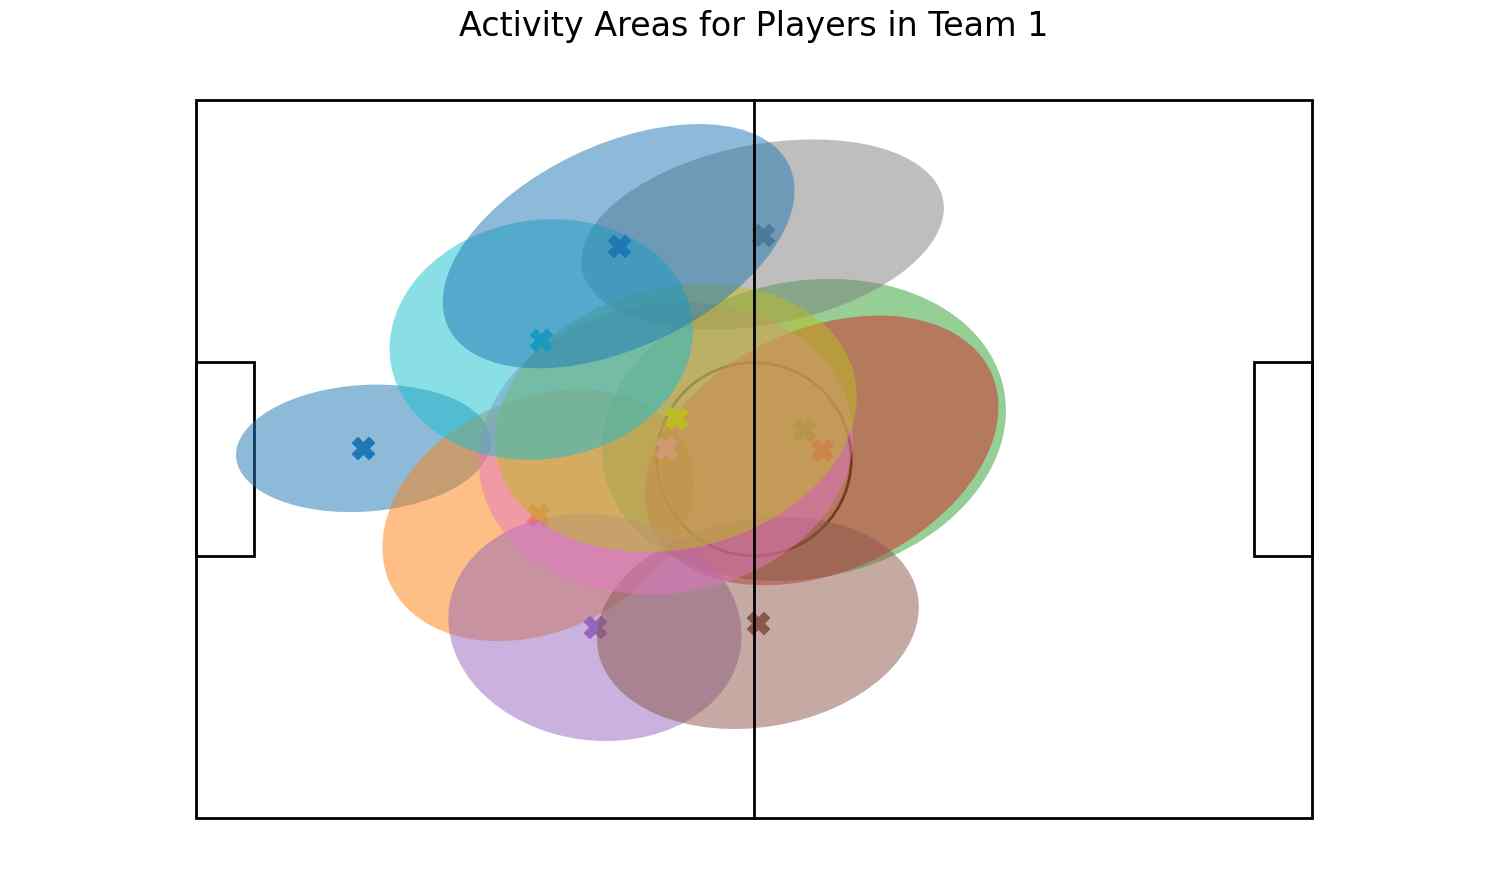 A top-view diagram of a soccer field with ellipses representing the activity areas of different players in Team 1 during a 30-minute match.